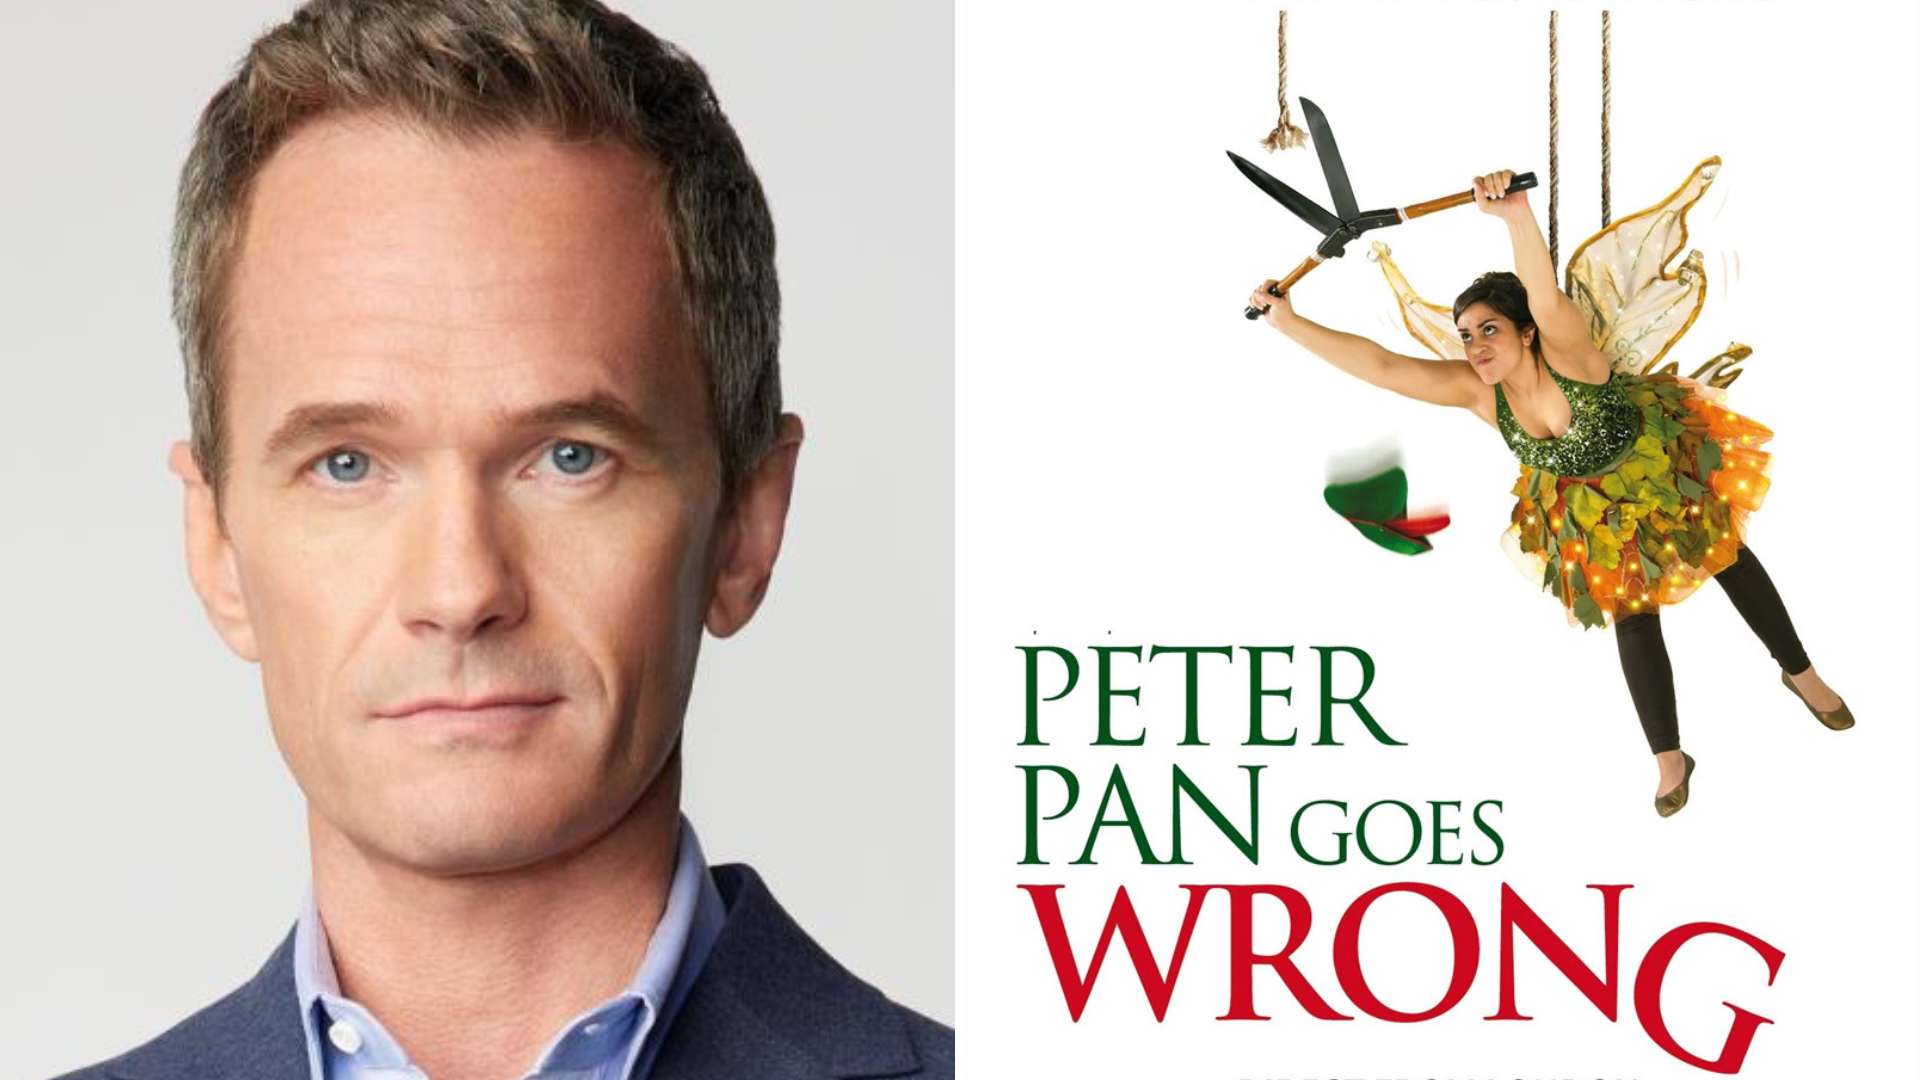 Neil Patrick Harris to Guest Star in Broadway’s Peter Pan Goes Wrong